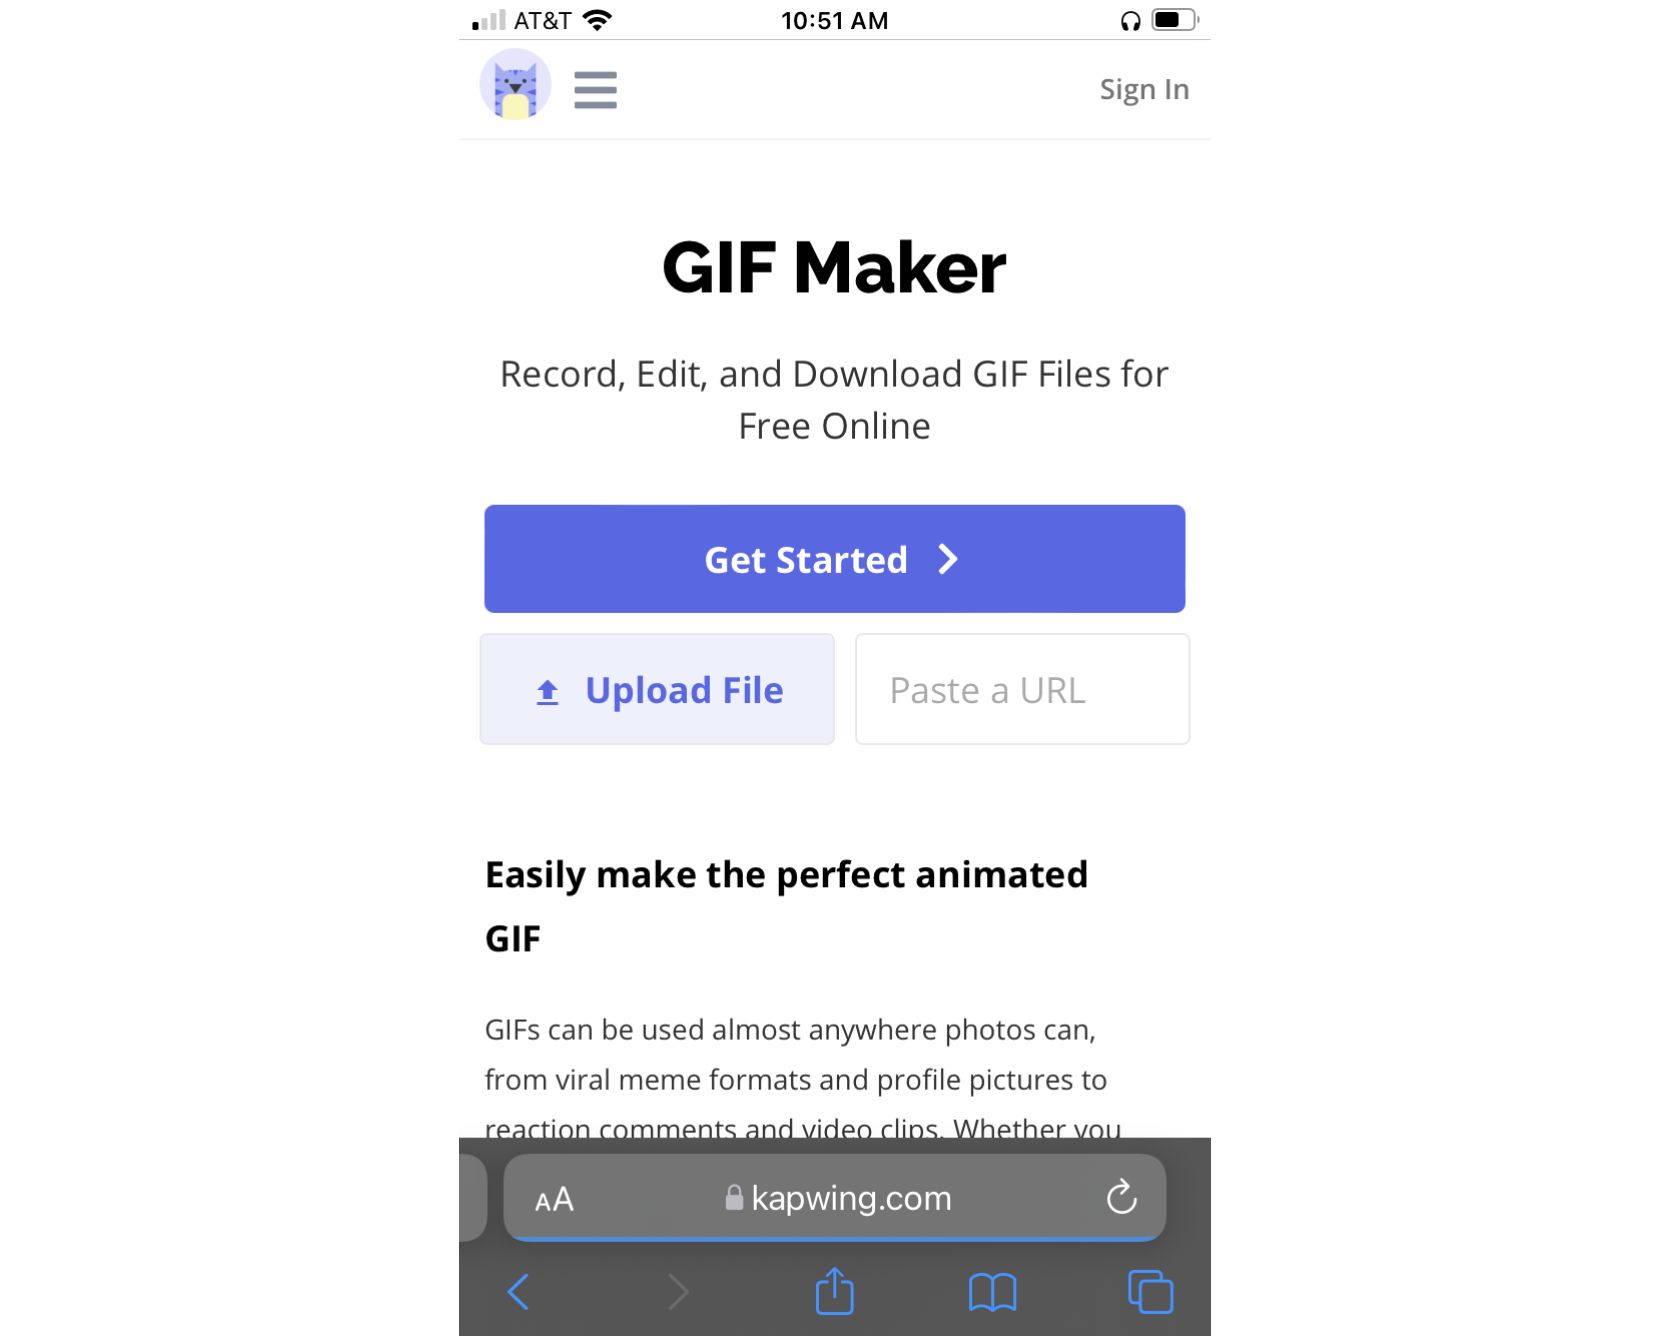 Free Online Animated GIF Maker